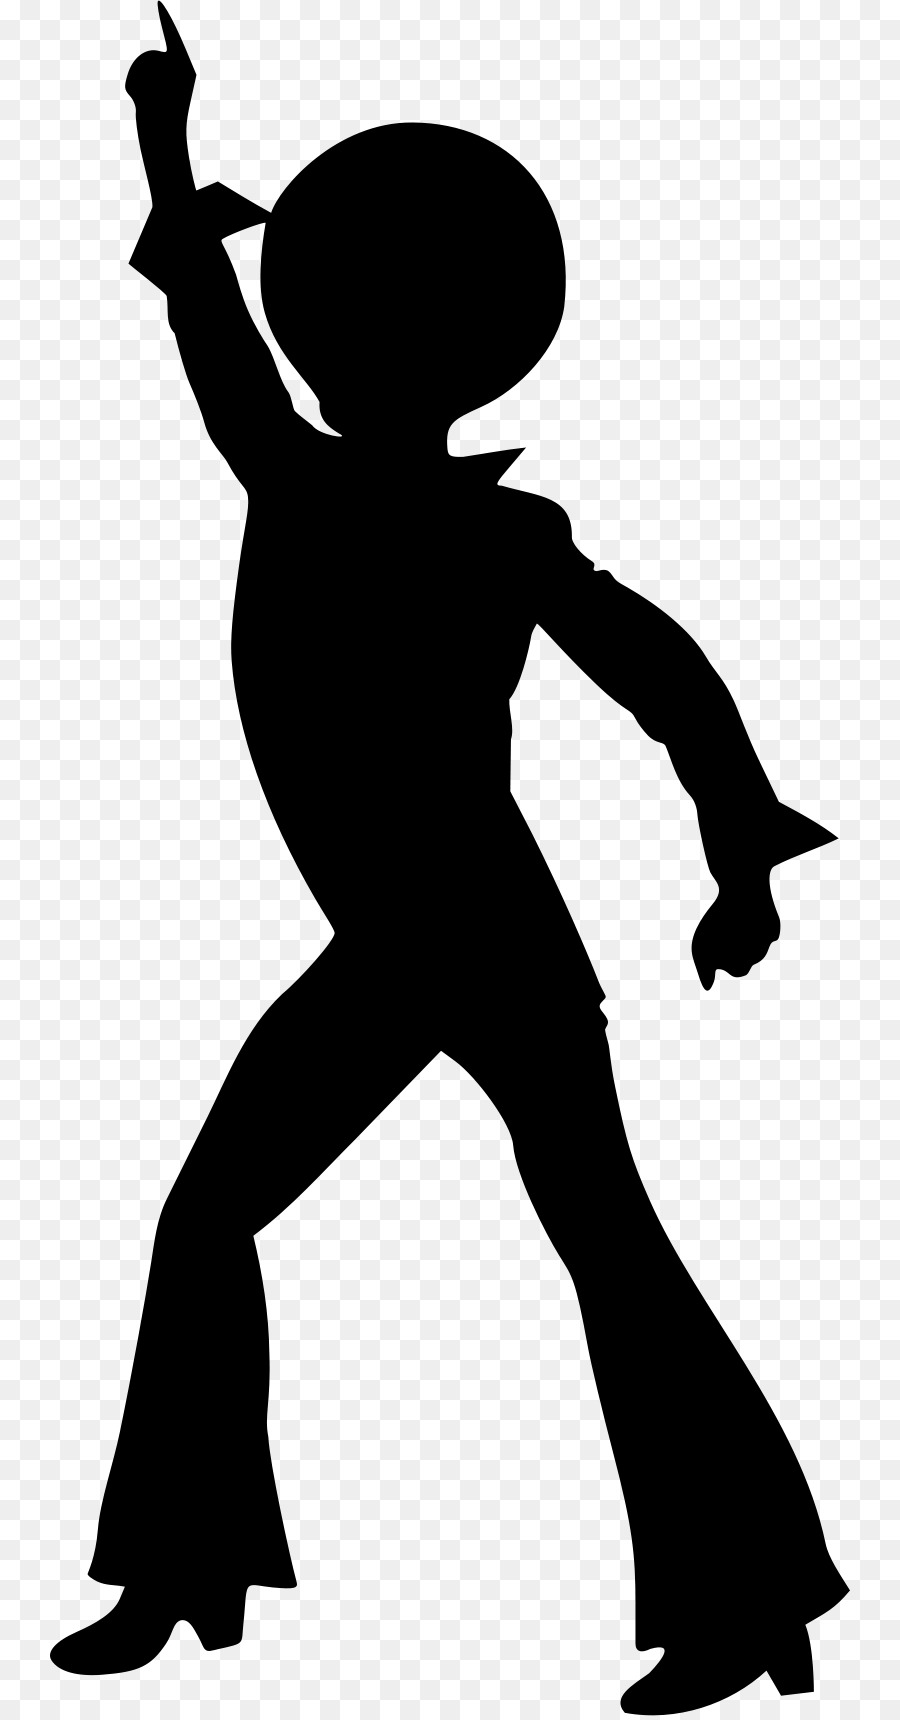 Disco Dance Silhouette Clip art - Silhouette png download - 800*1716 - Free Transparent Disco png Download.